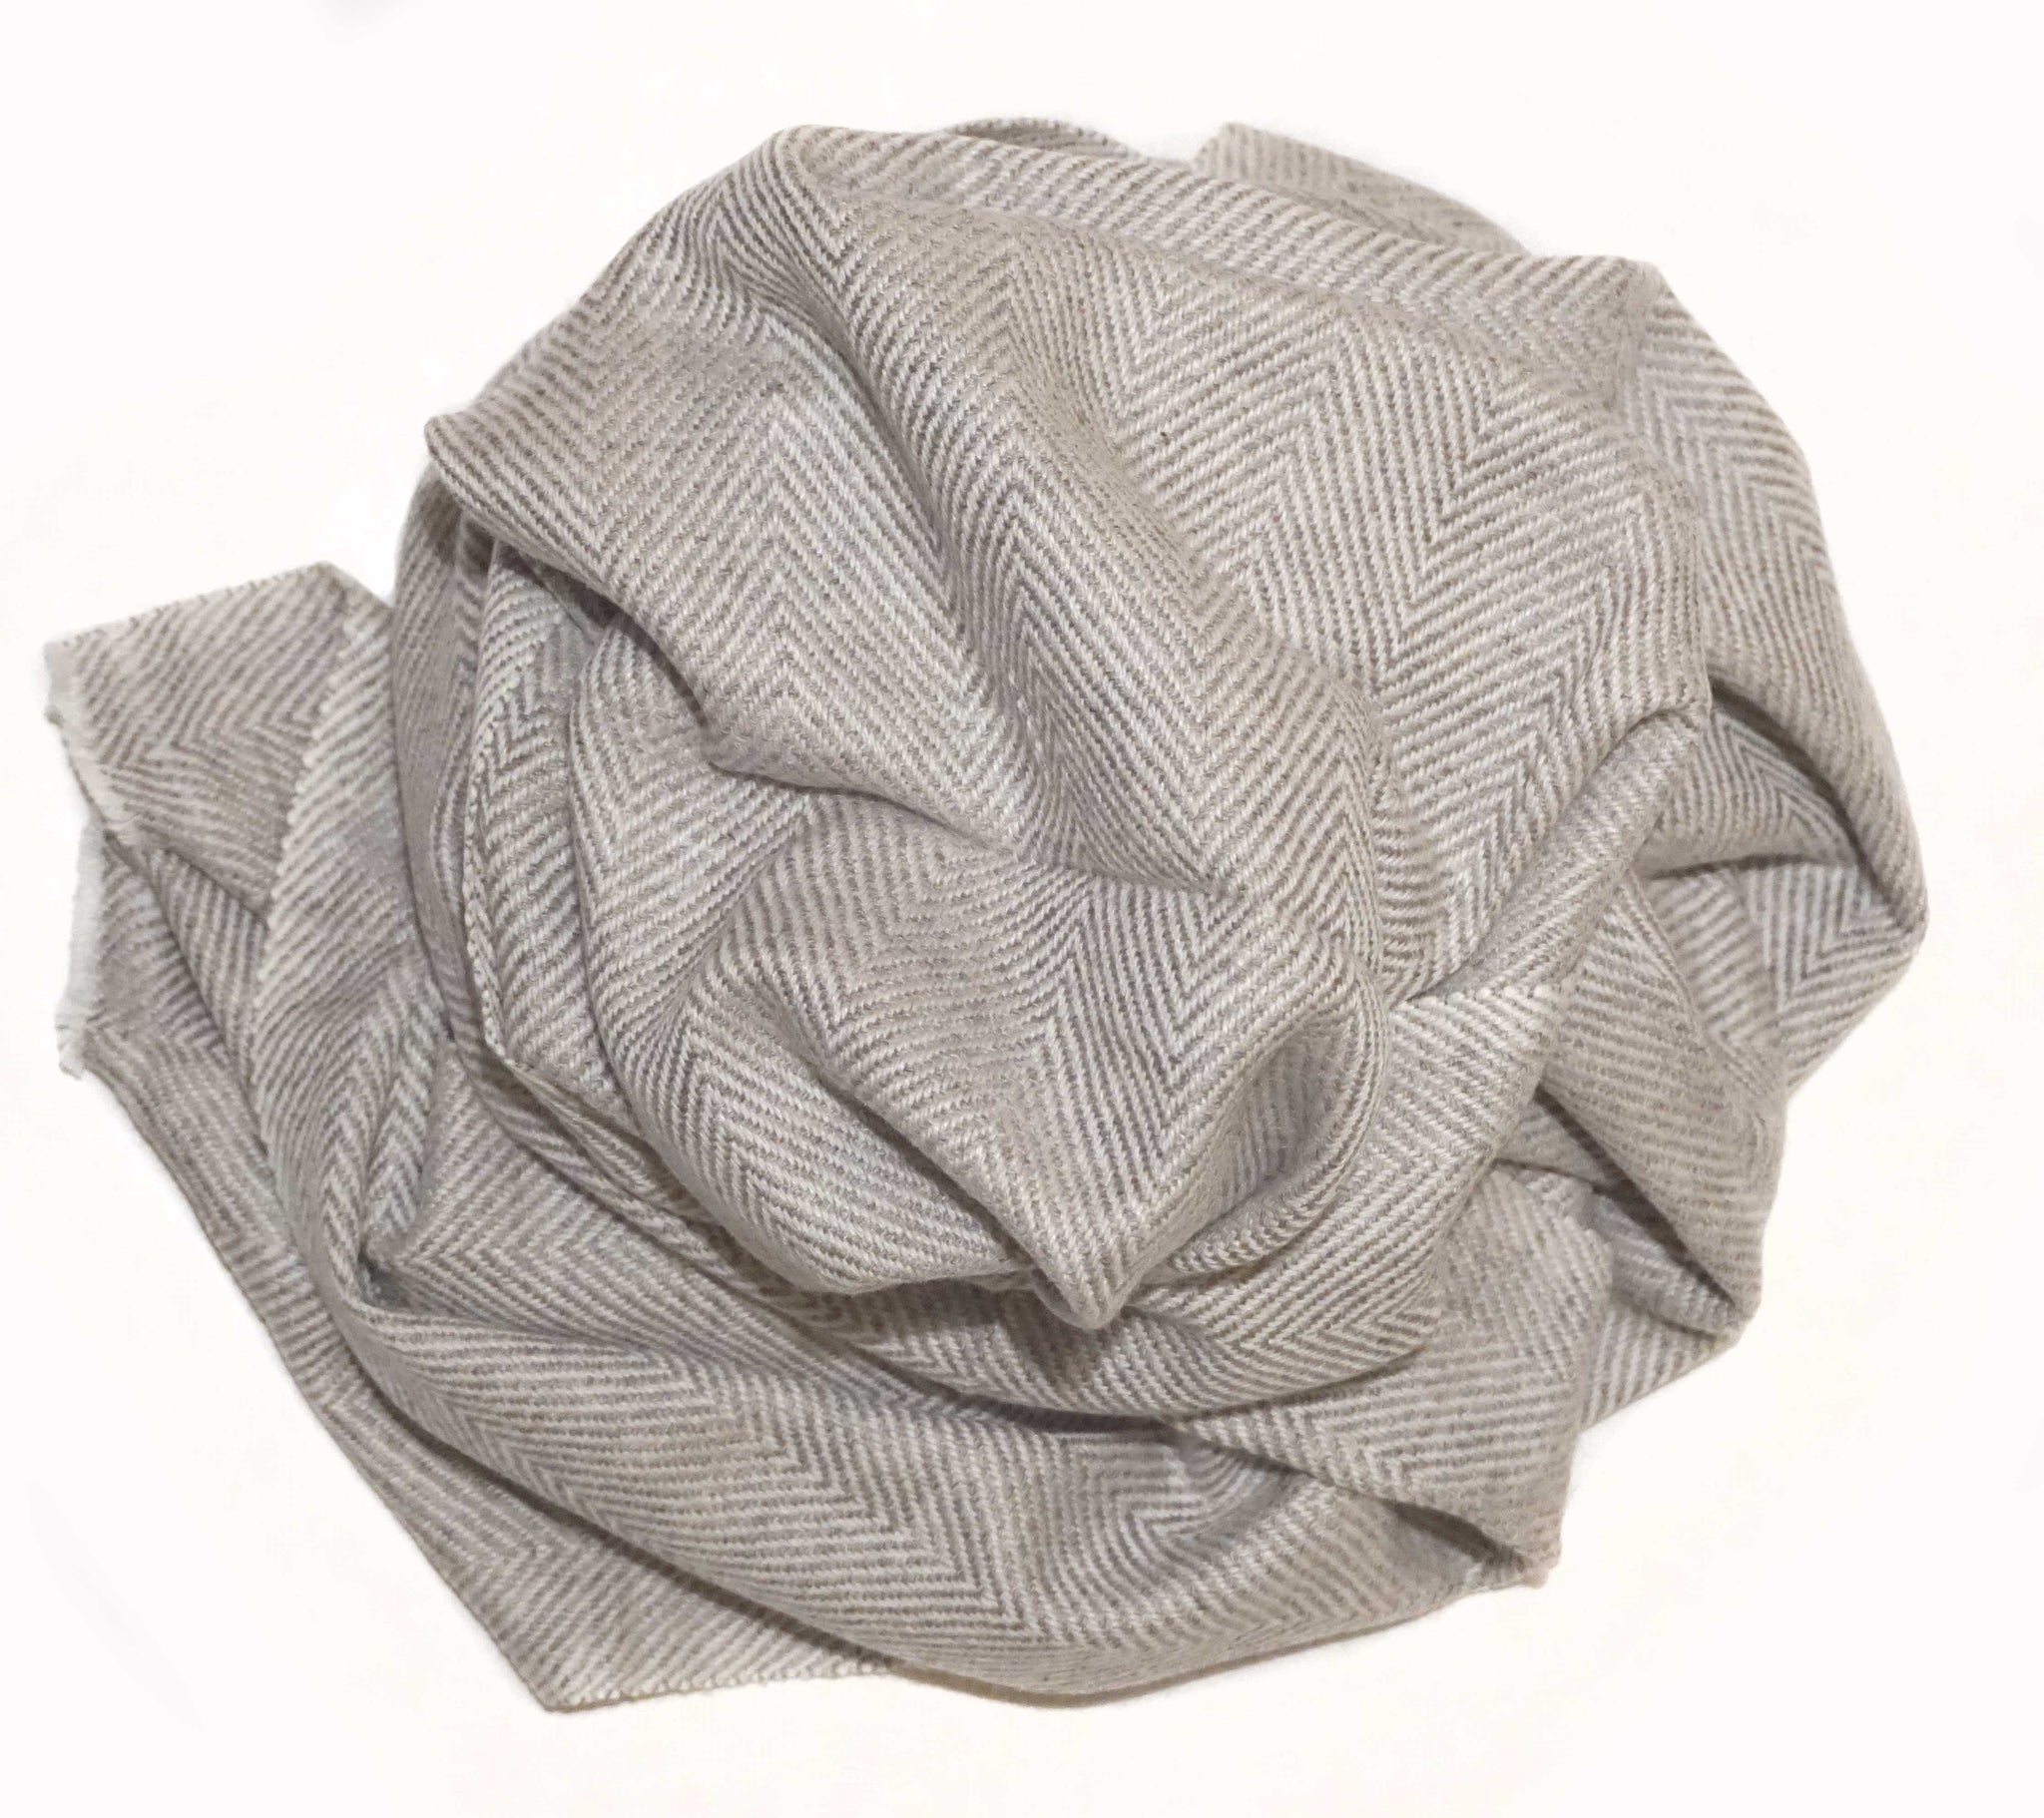 Soft grey cashmere scarf. Casual look - Marie-Pierre Rousseau